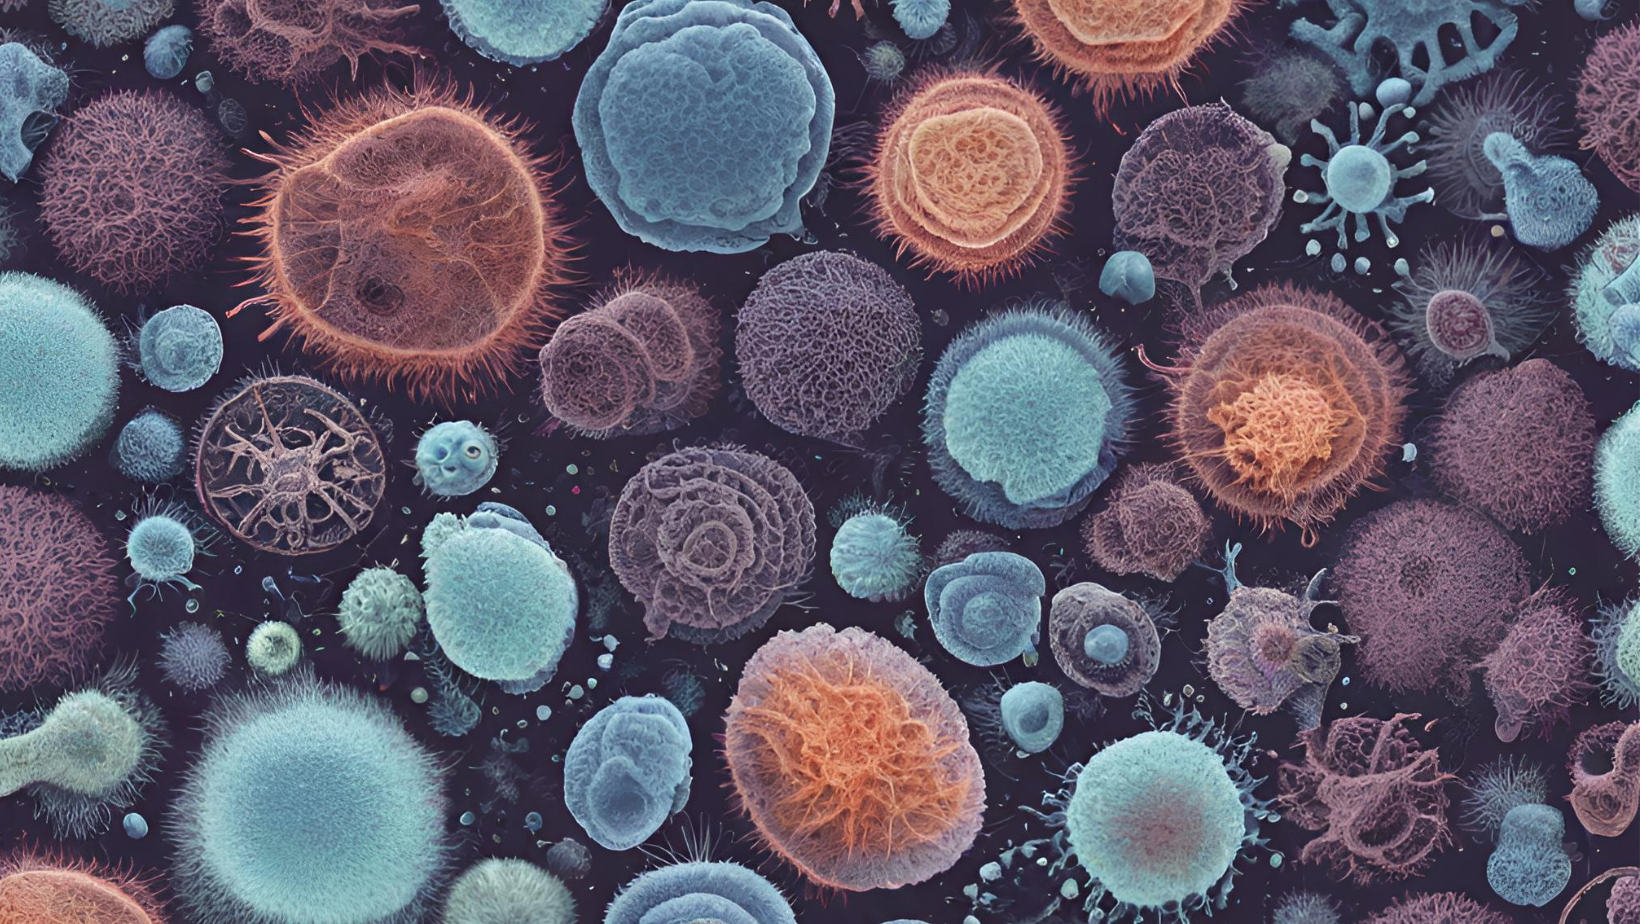 Abstract microbe pattern